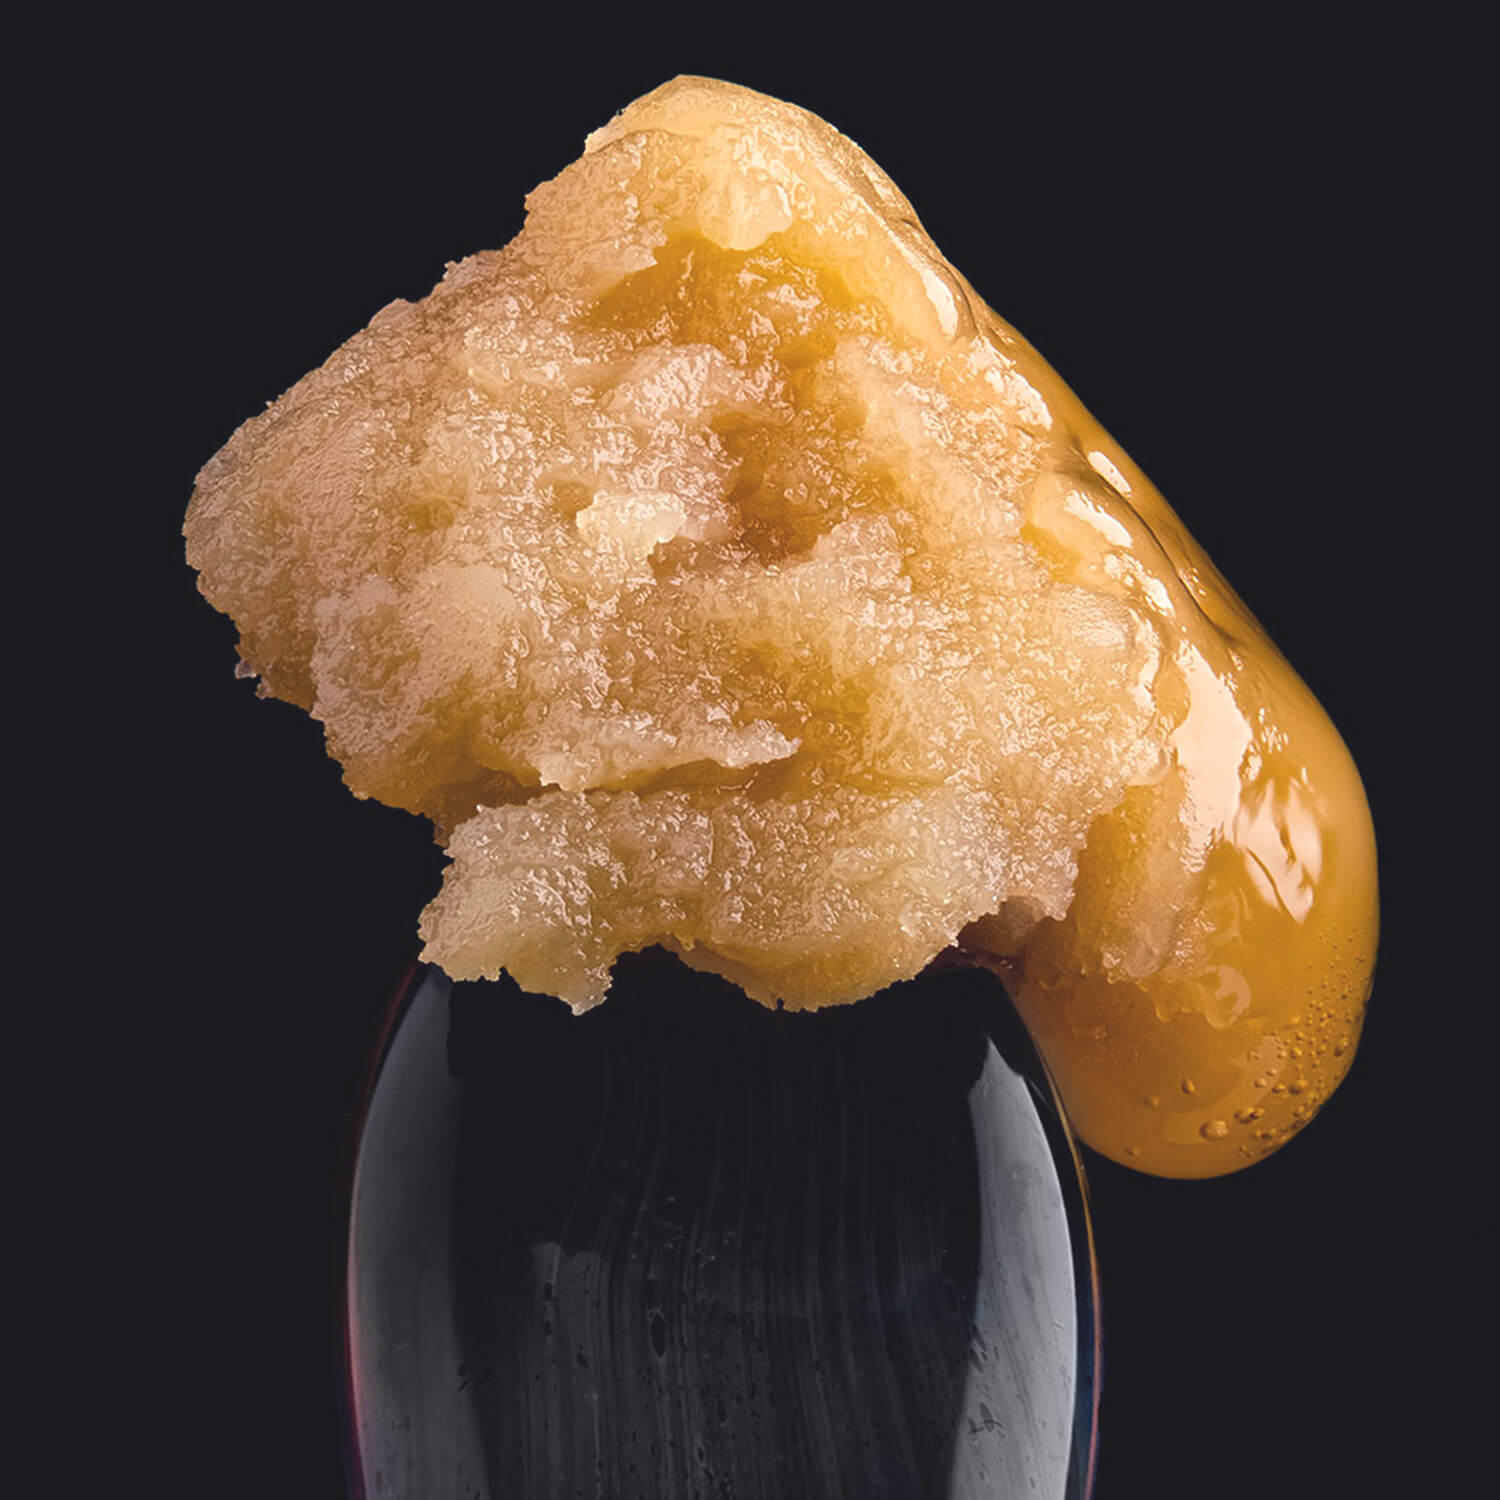 DC_CONCENTRATE_CHERRYCHEM_CRUMBLE